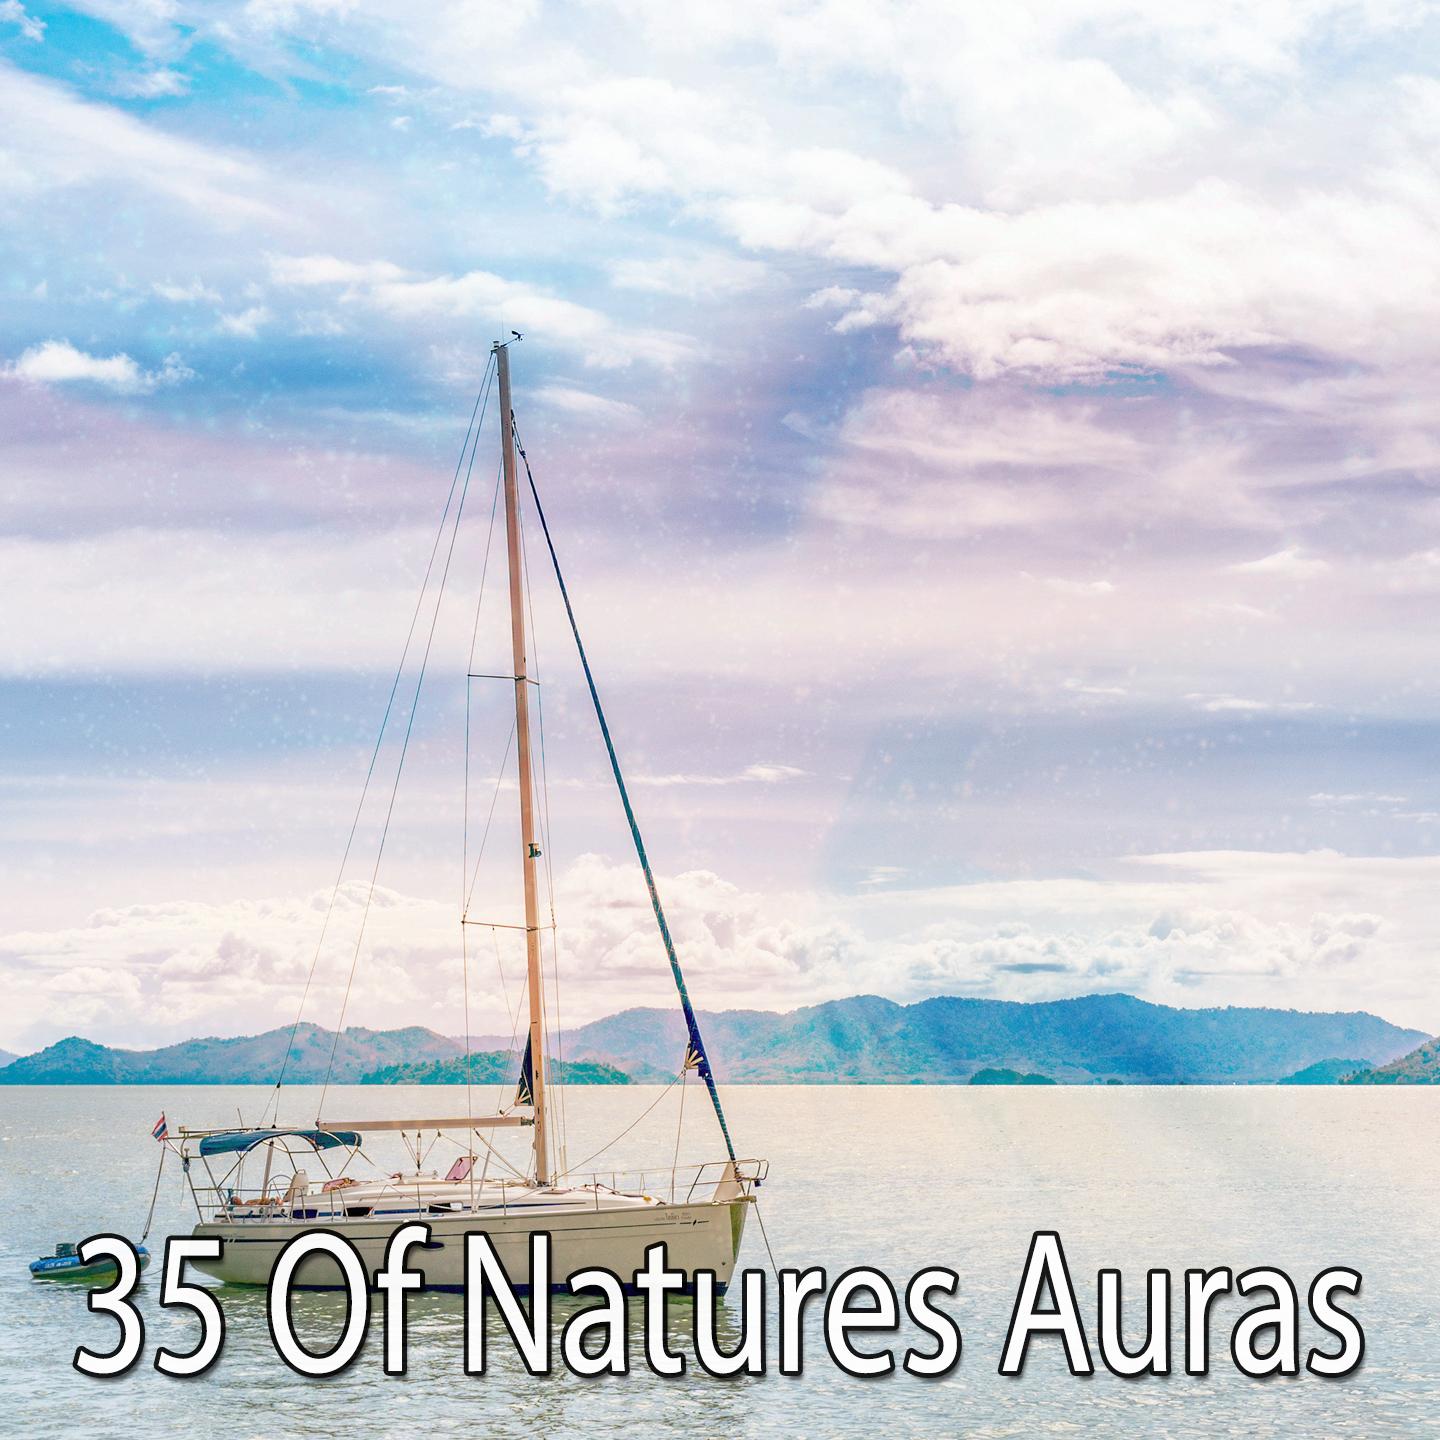 35 Of Natures Auras